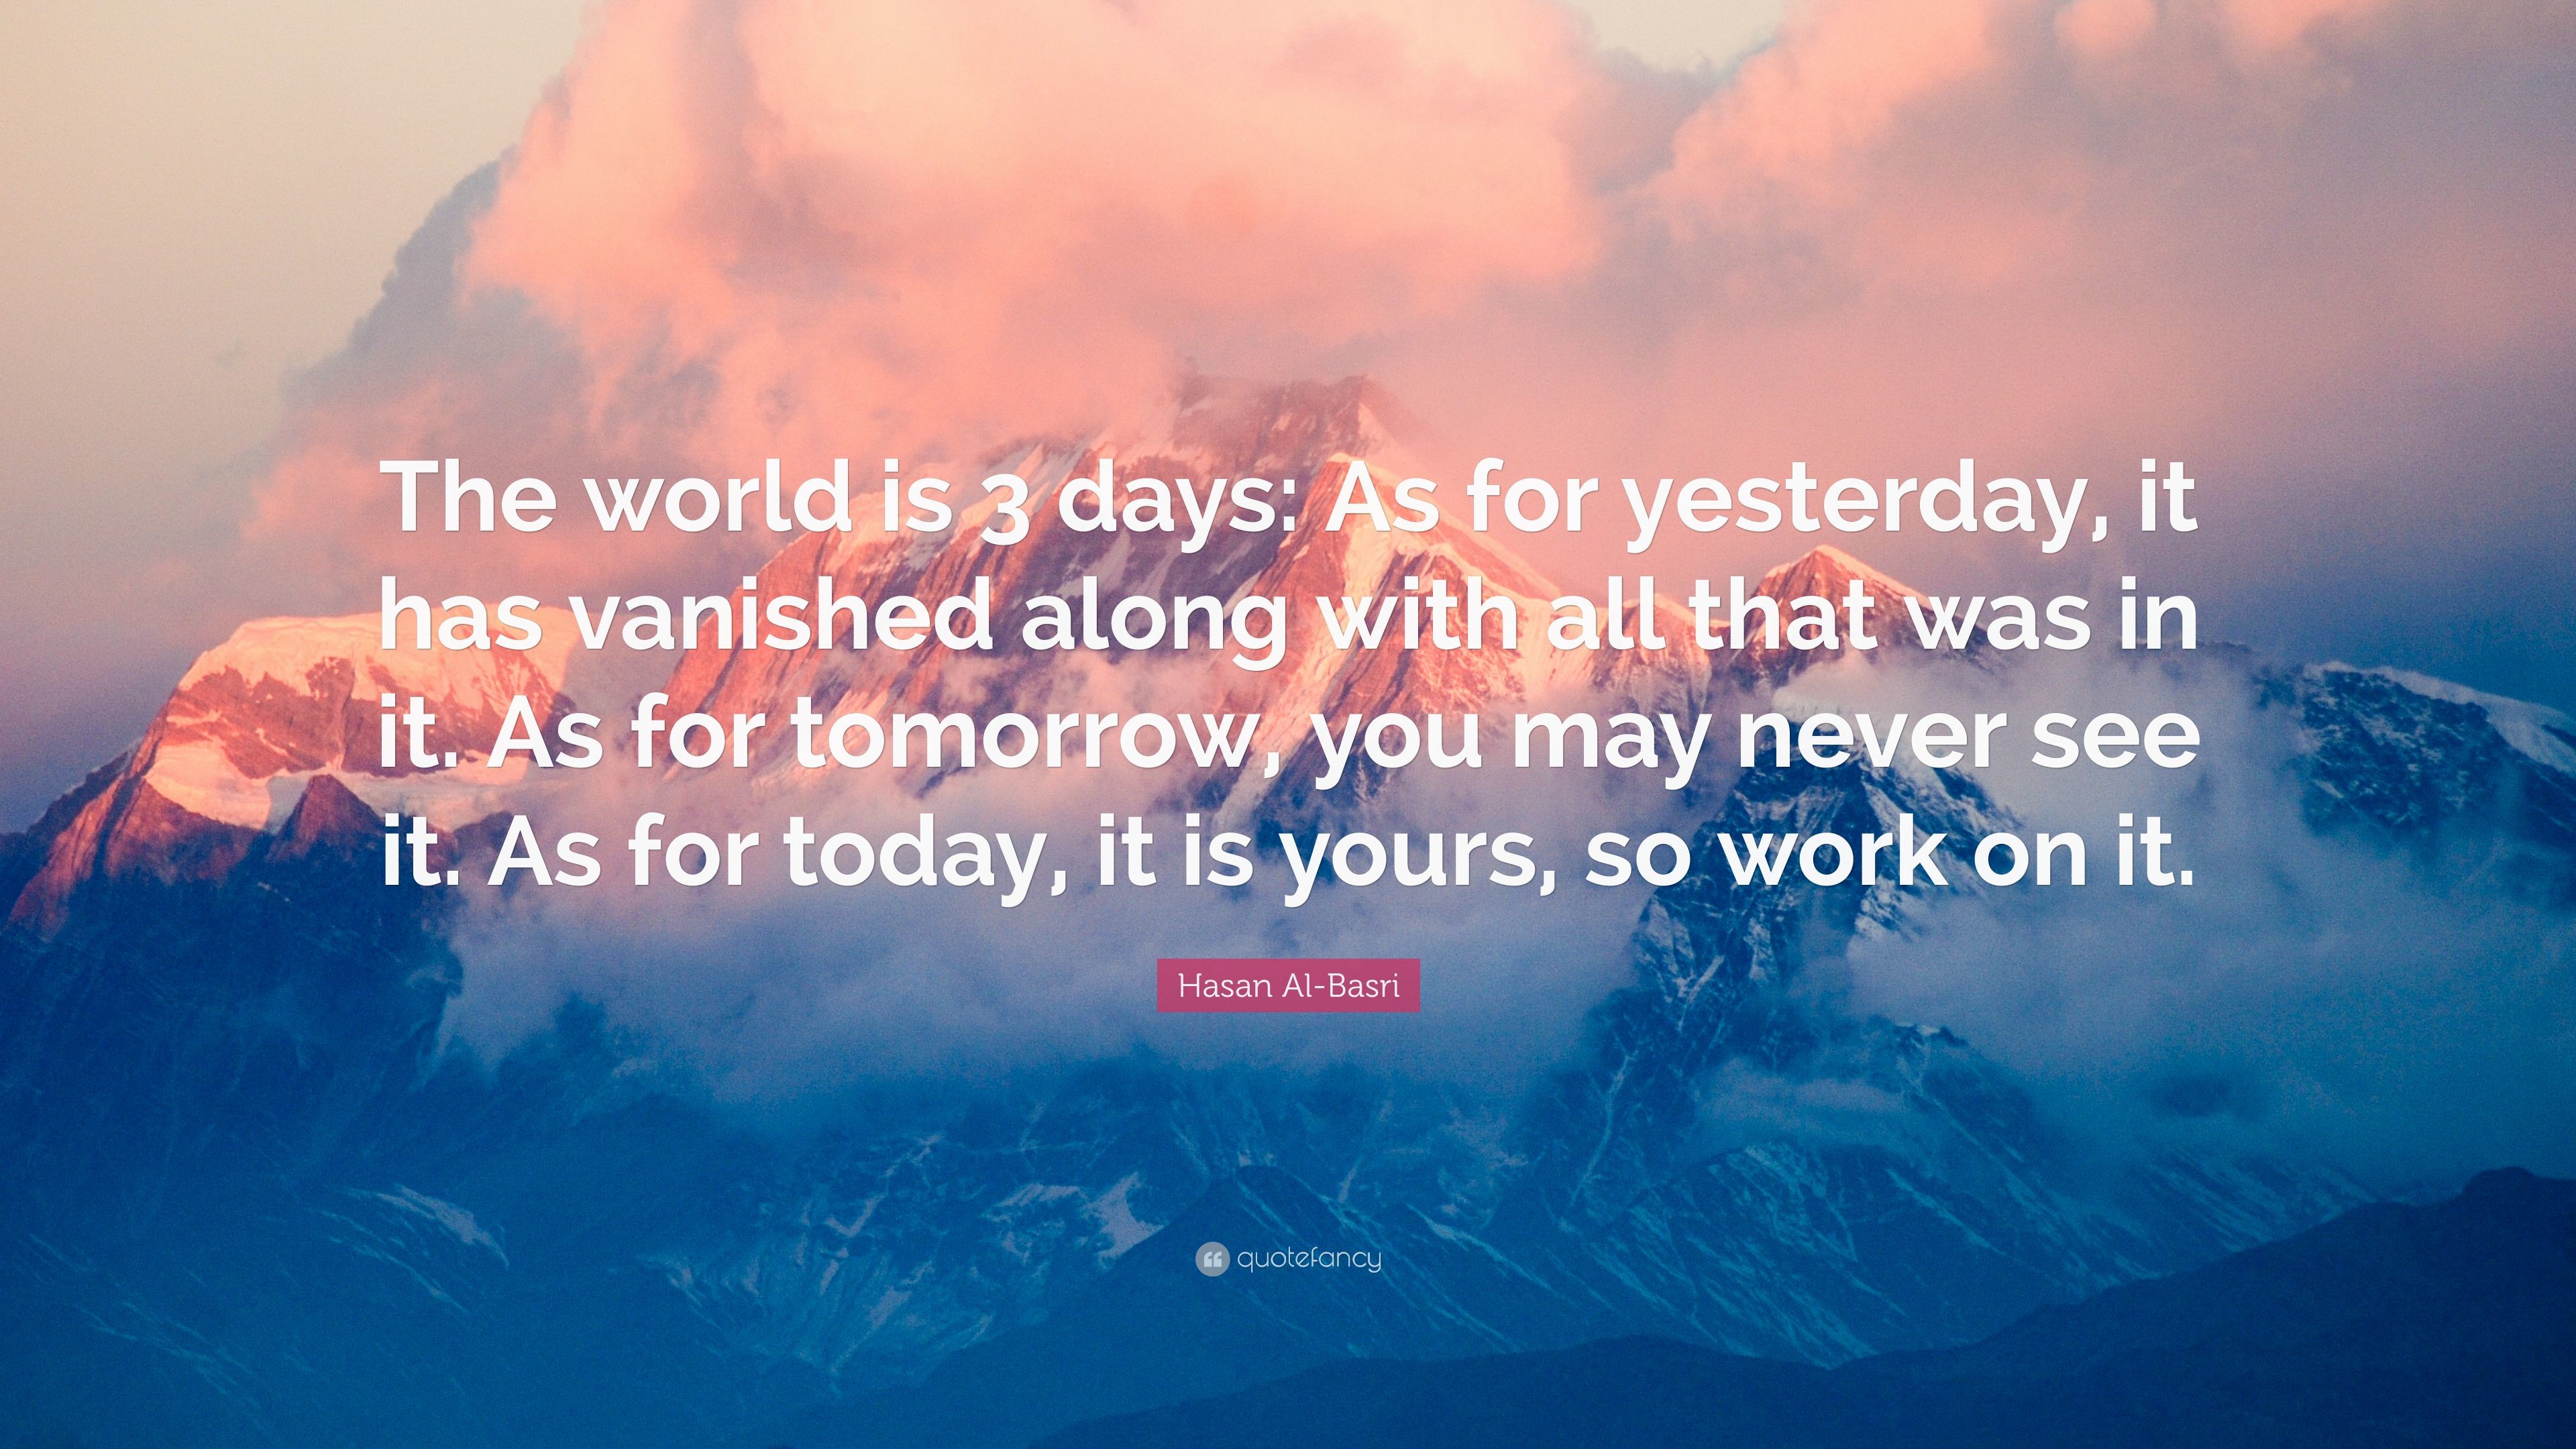 3840x2160 Hasan Al-Basri Quote: “The world is 3 days: As for yesterday